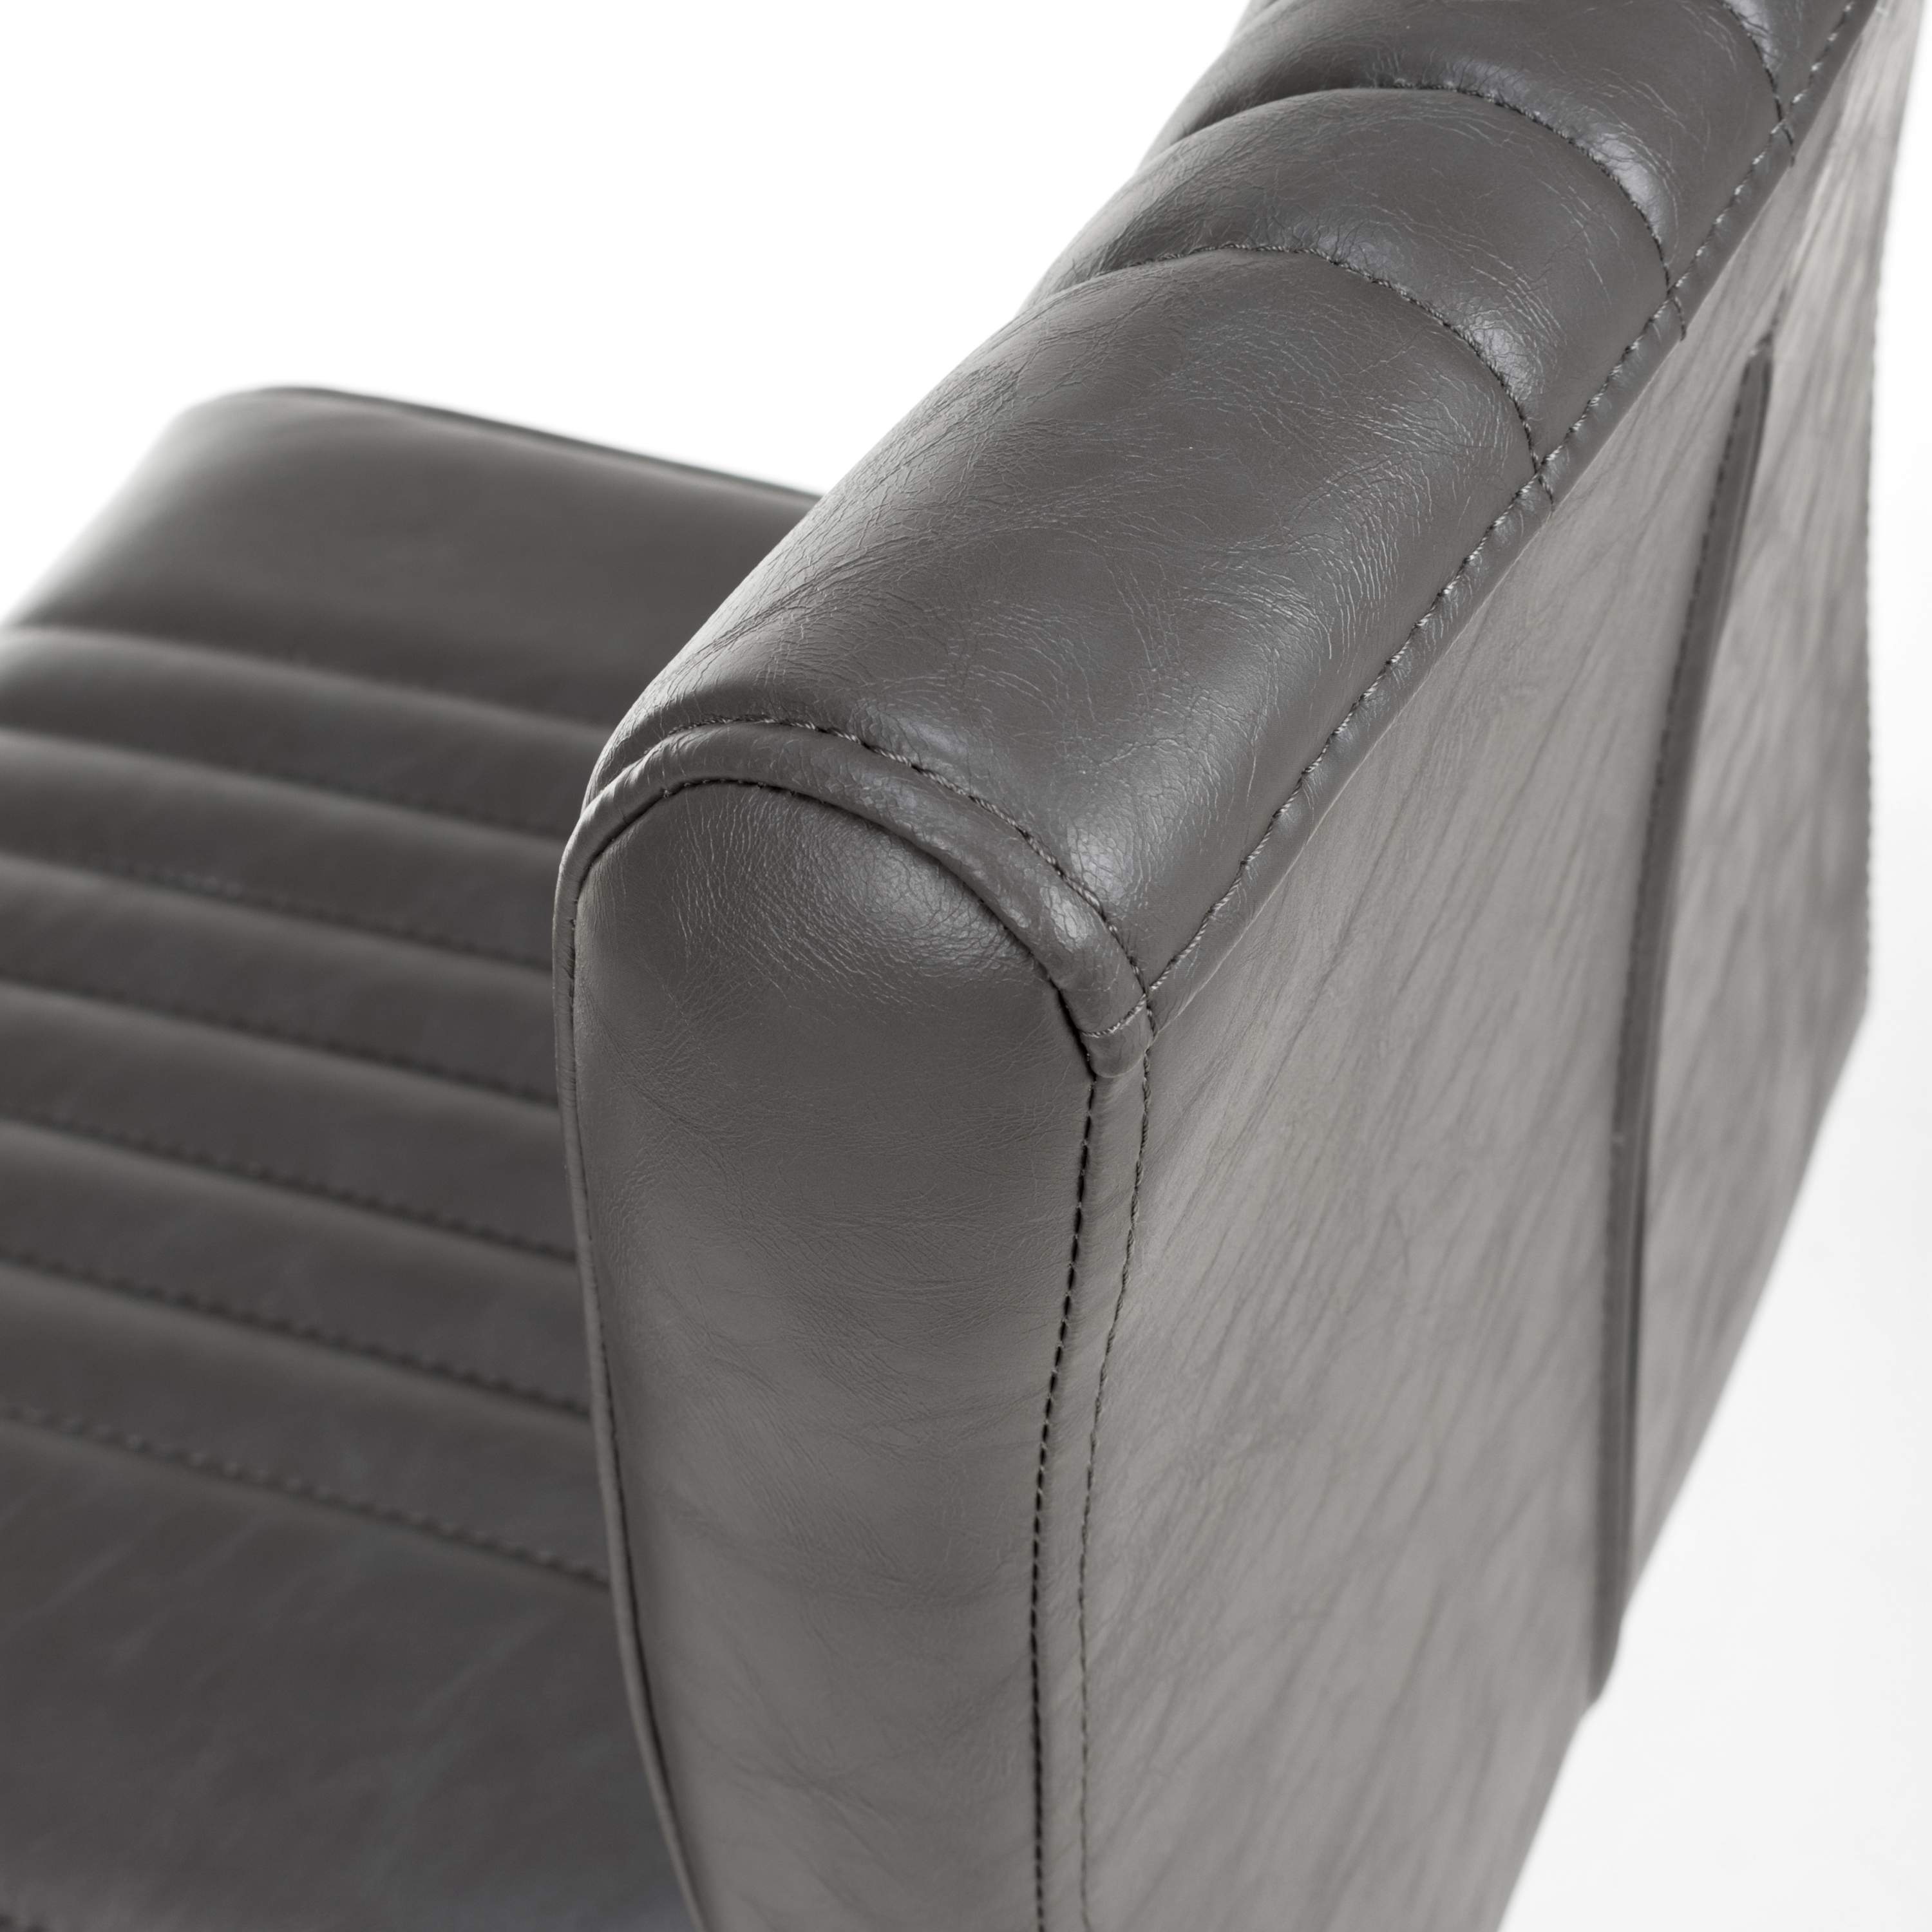 Pair of Leather effect Grey Bar Chair